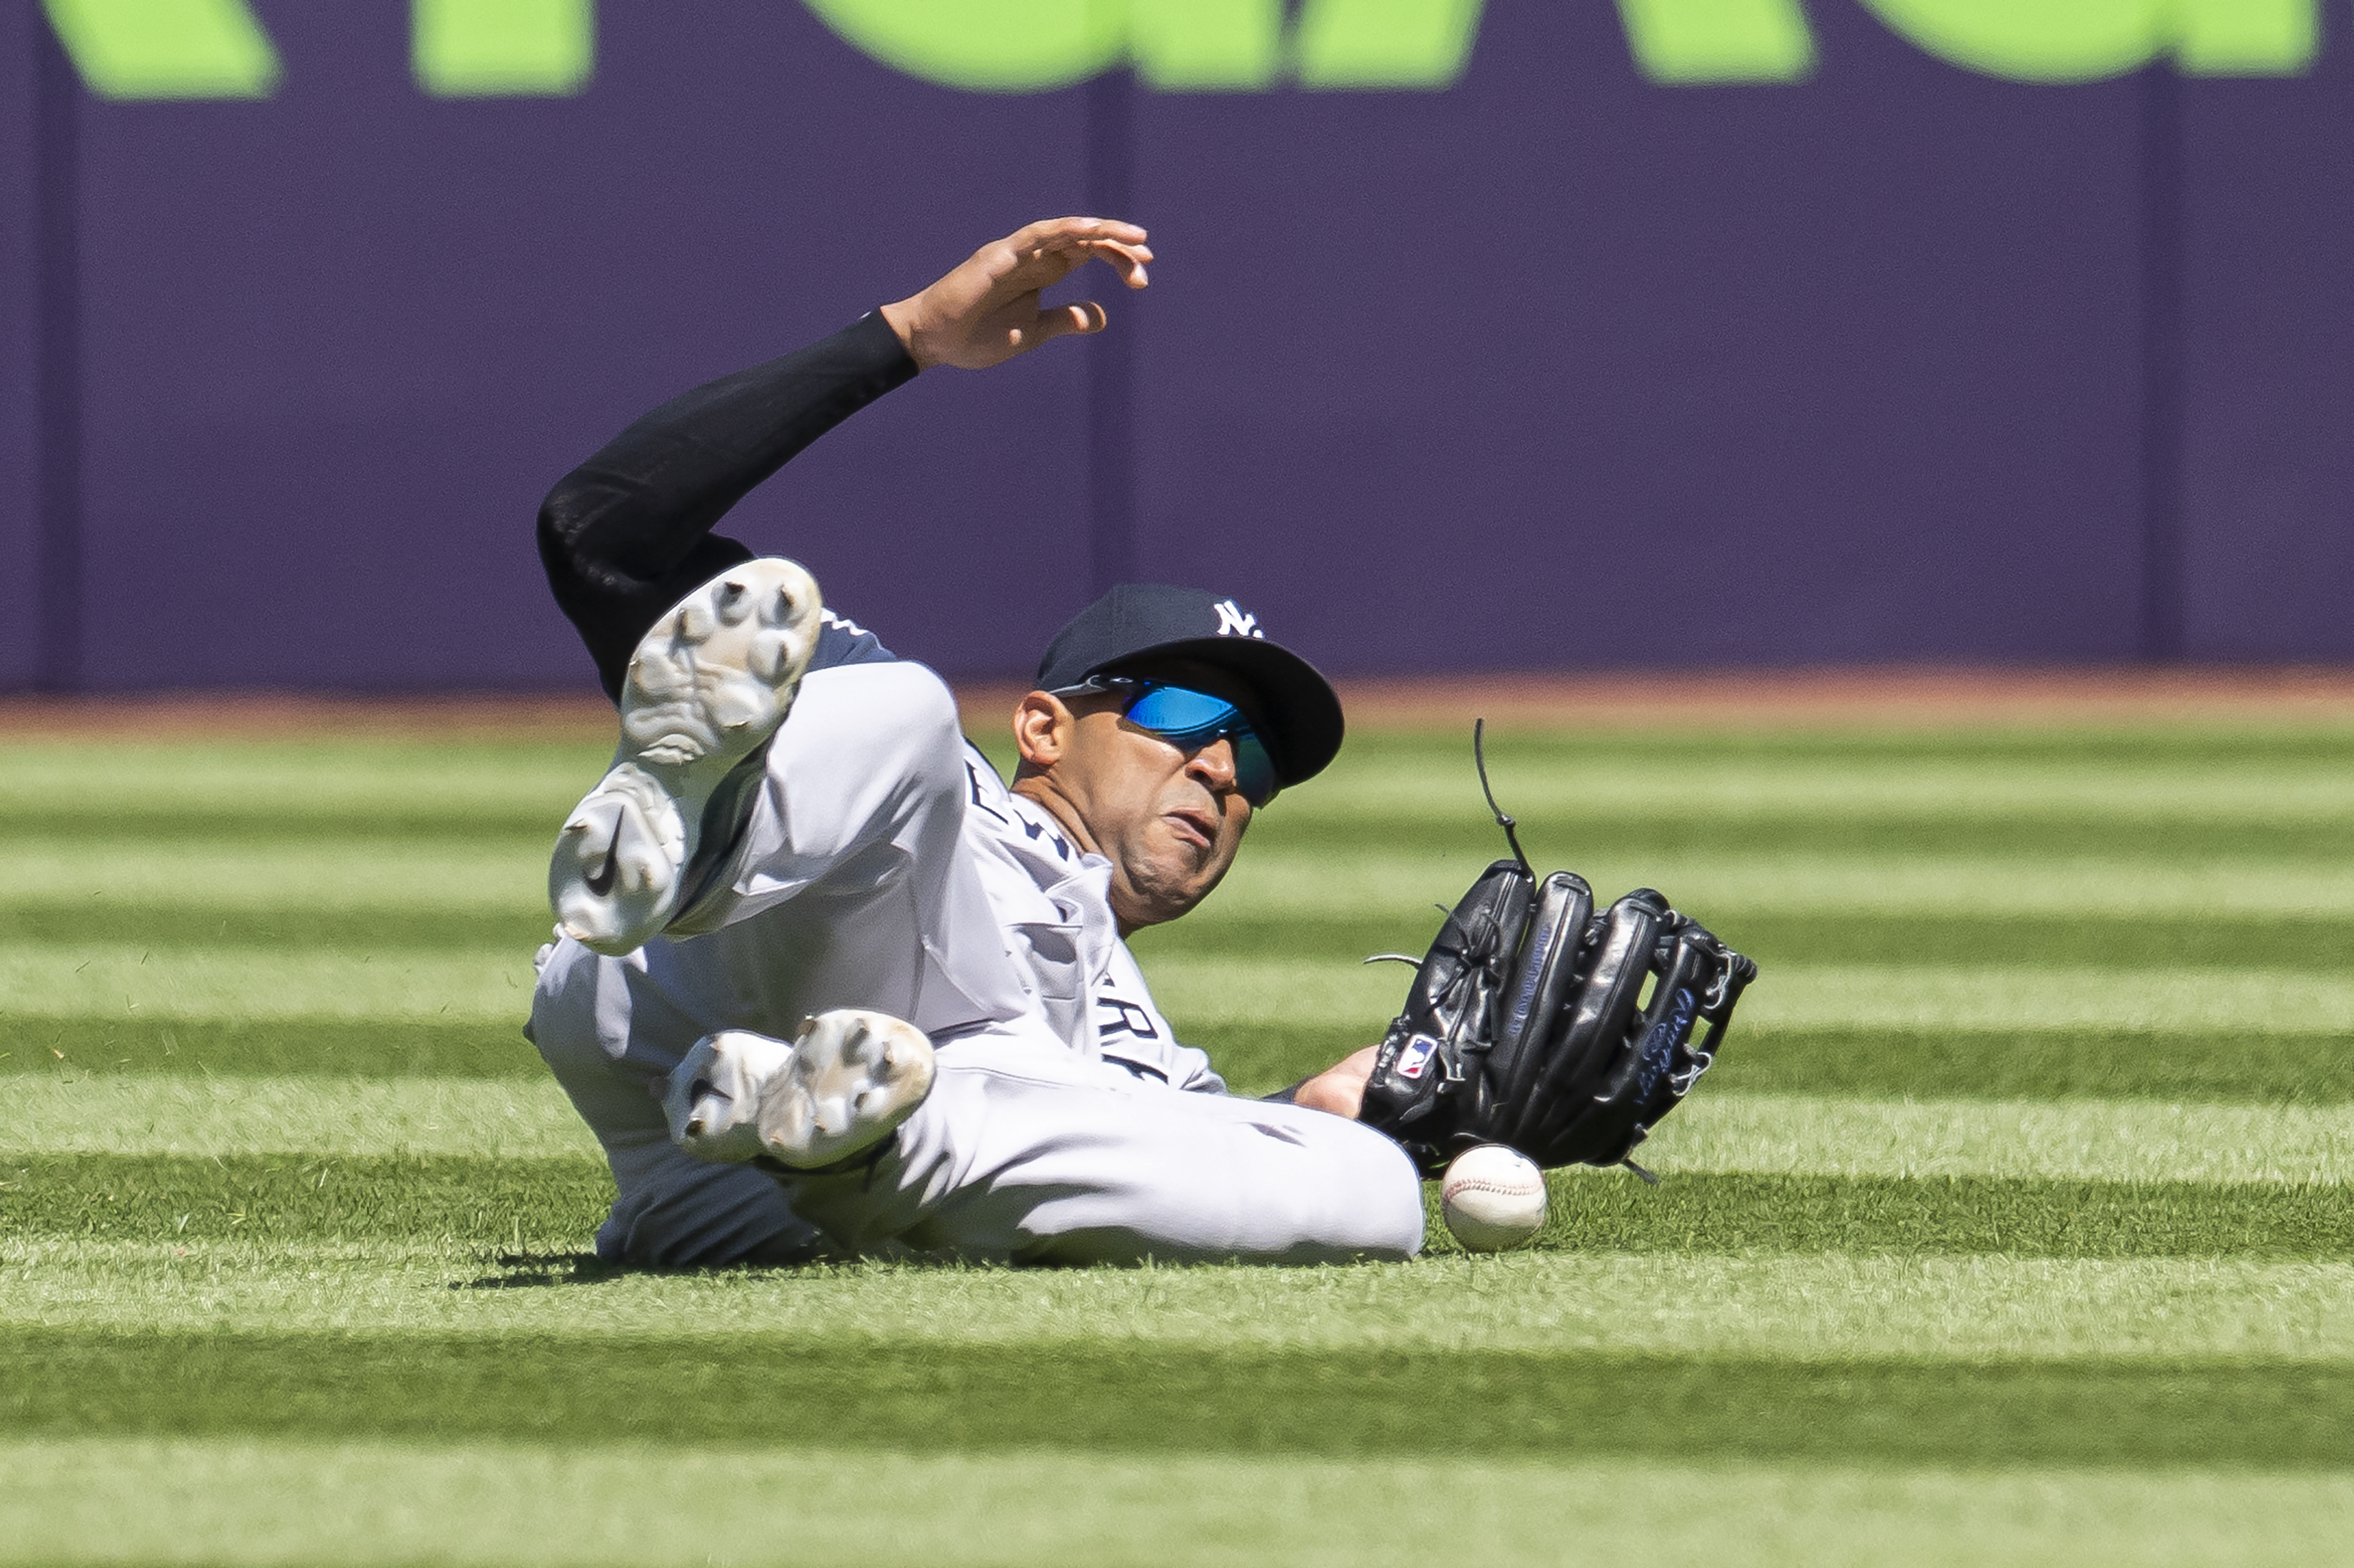 Oswaldo Cabrera of the New York Yankees makes a catch in right field  News Photo - Getty Images